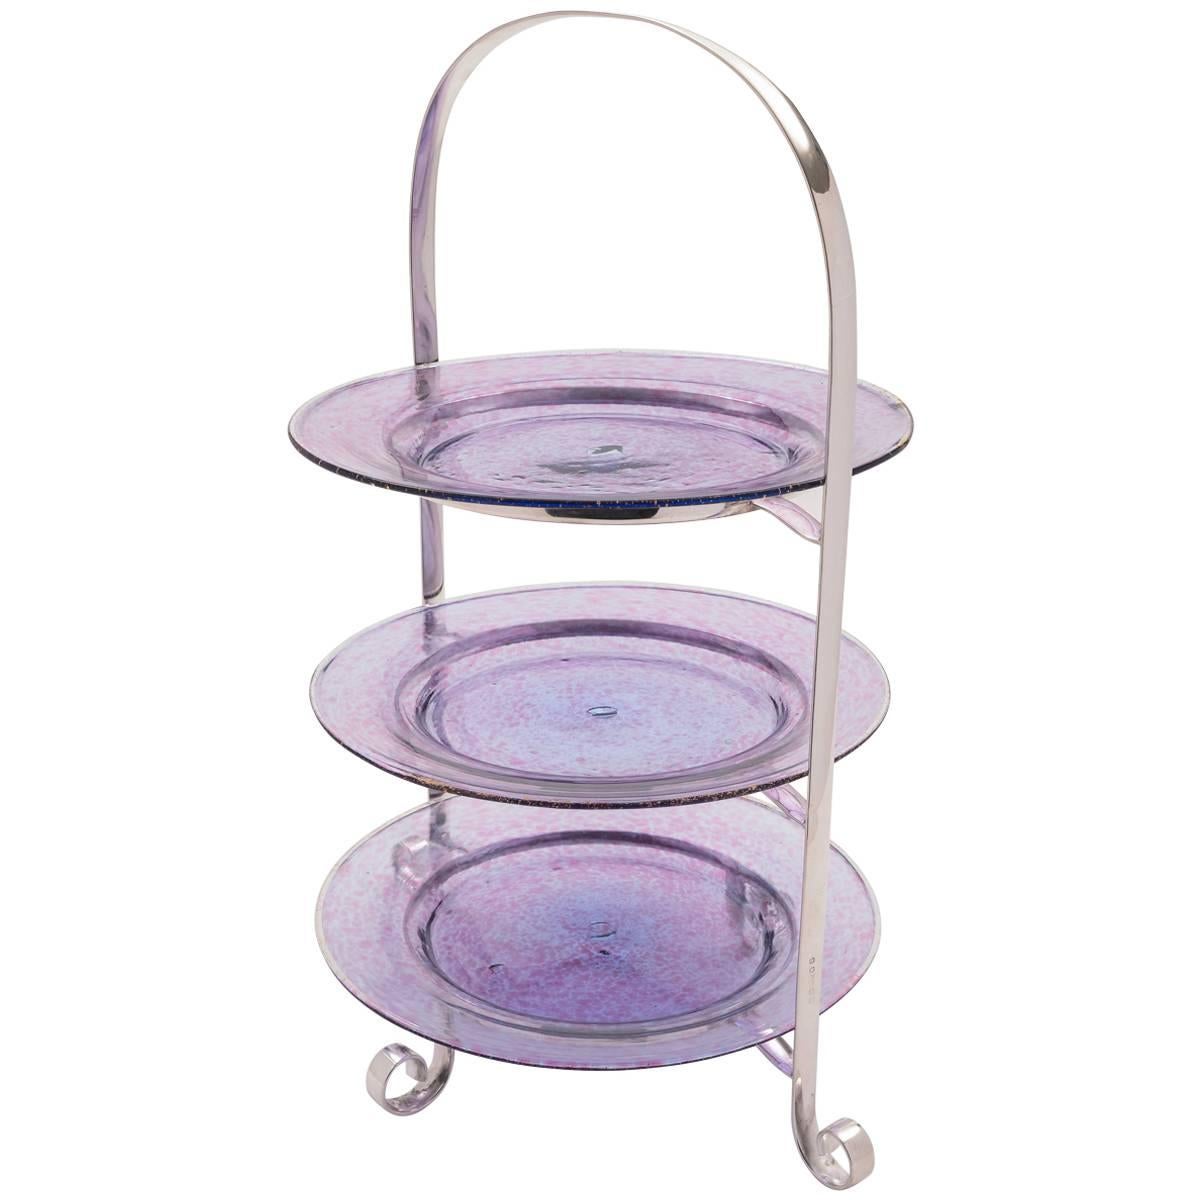 20th Century Three-Tier Silver Plated Cake Stand with Glass Plates